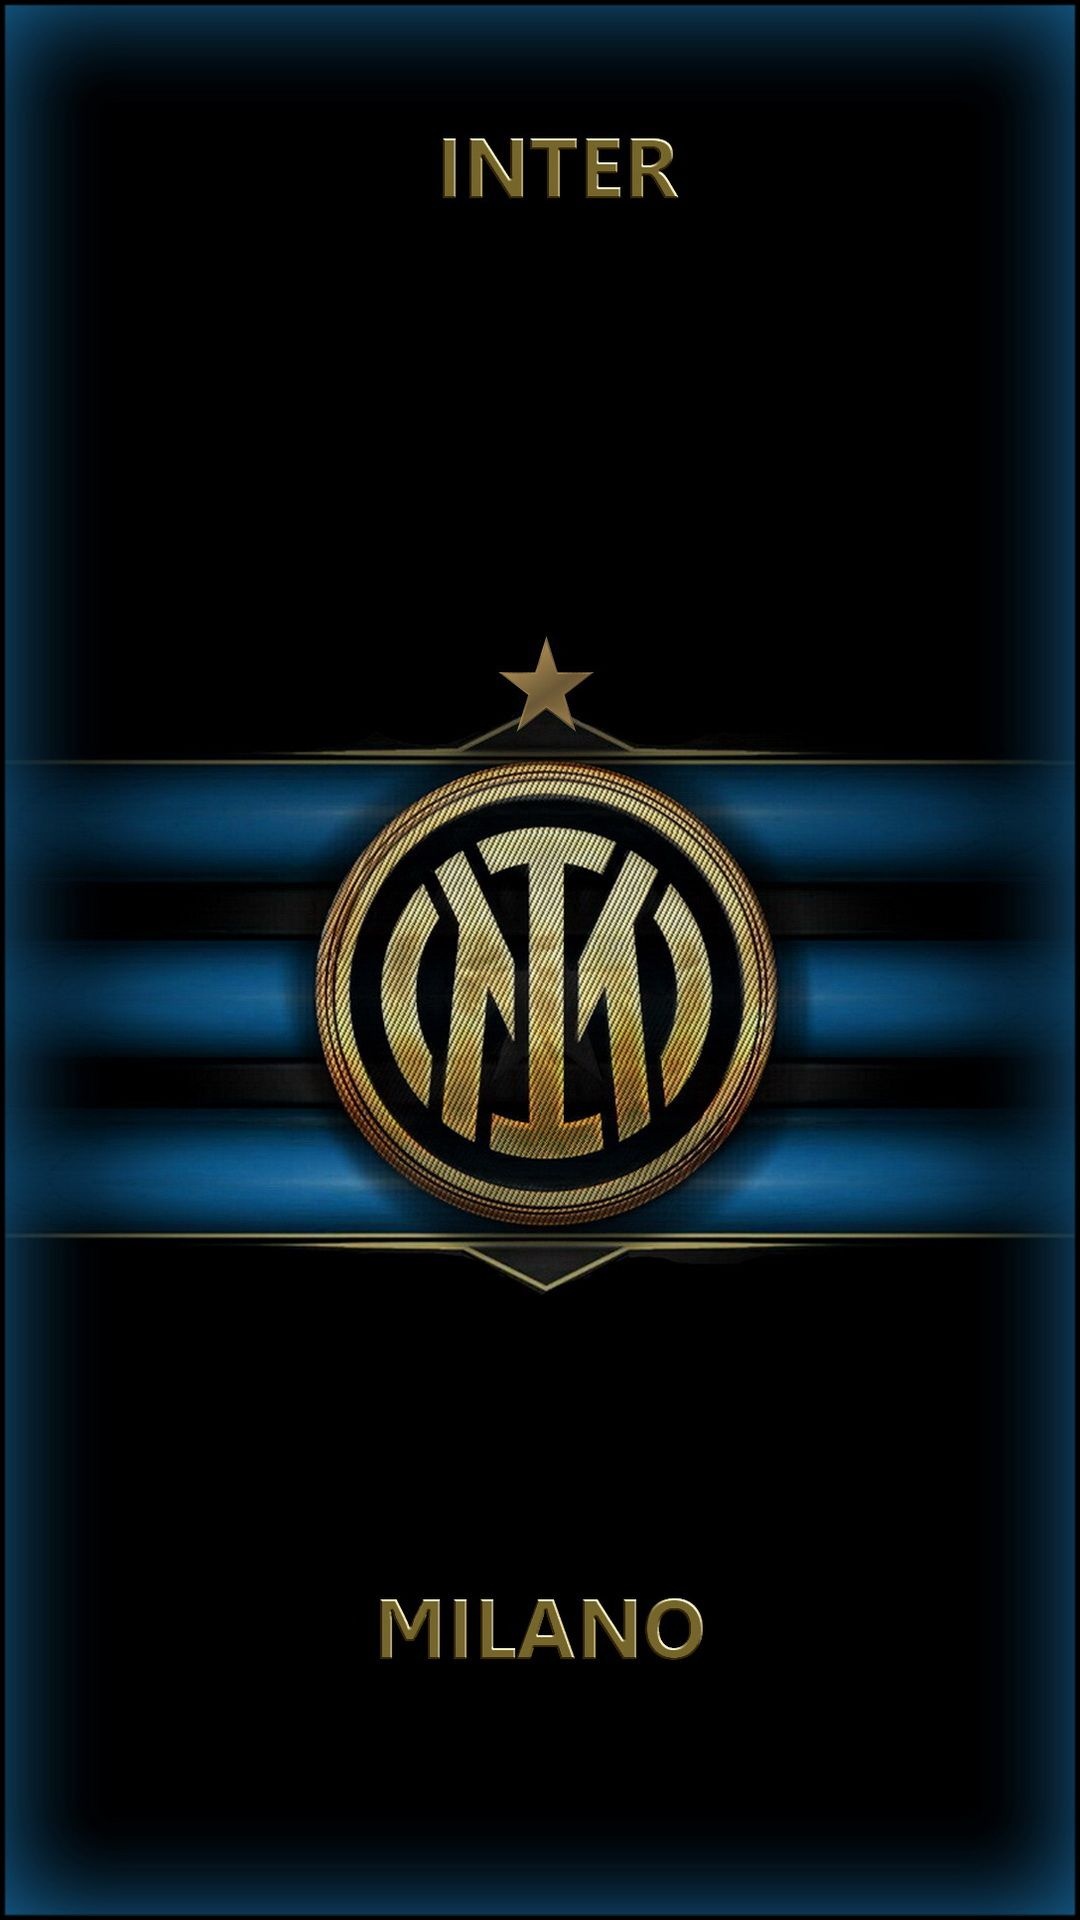 Inter: One of Italian most famous clubs, Internazionale Milano. 1080x1920 Full HD Background.